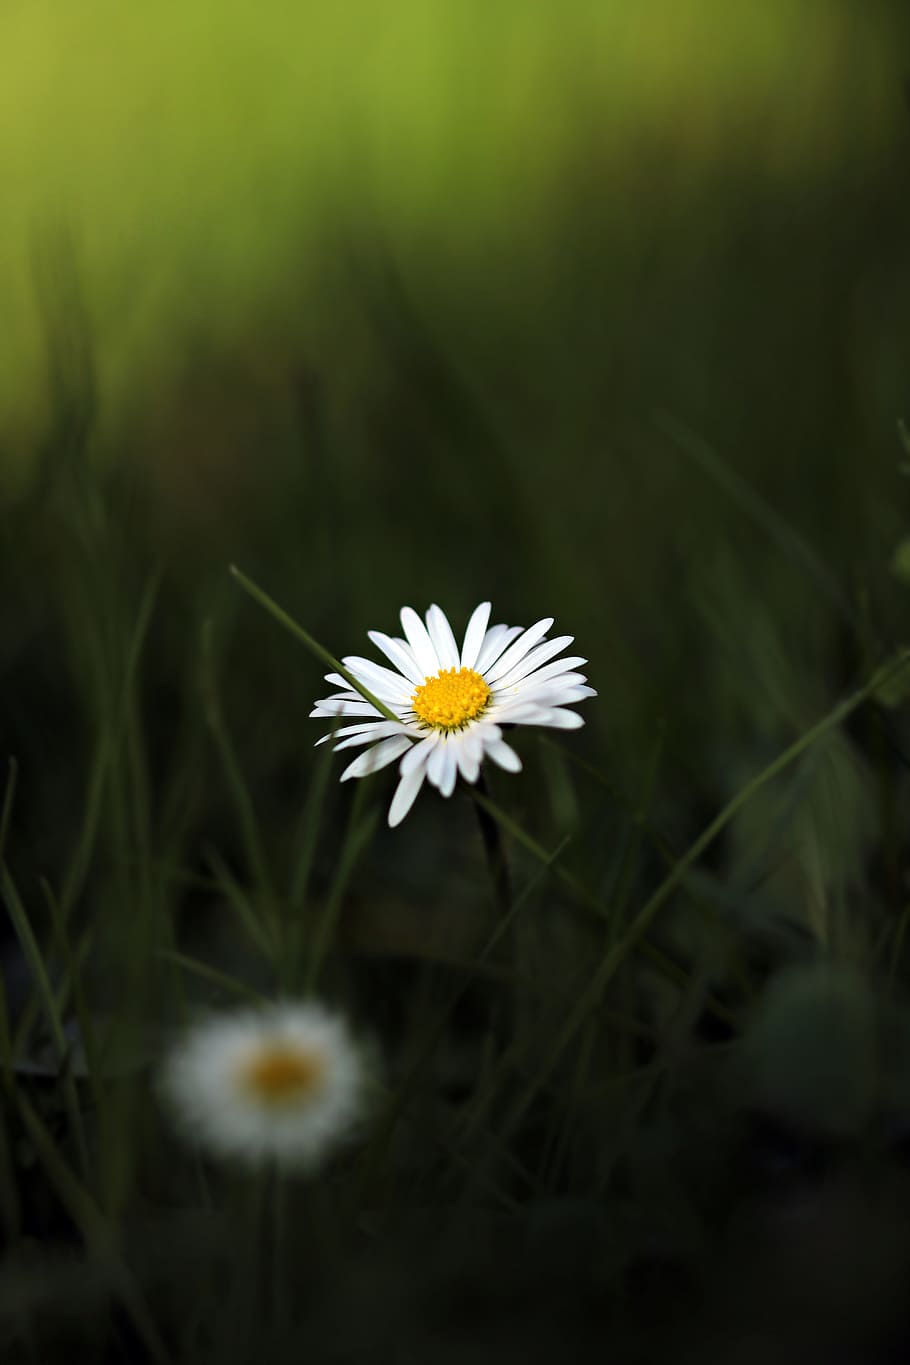 close, photography, white, petaled flower, daytime, close up photography, flower, daisy, pointed flower, meadow